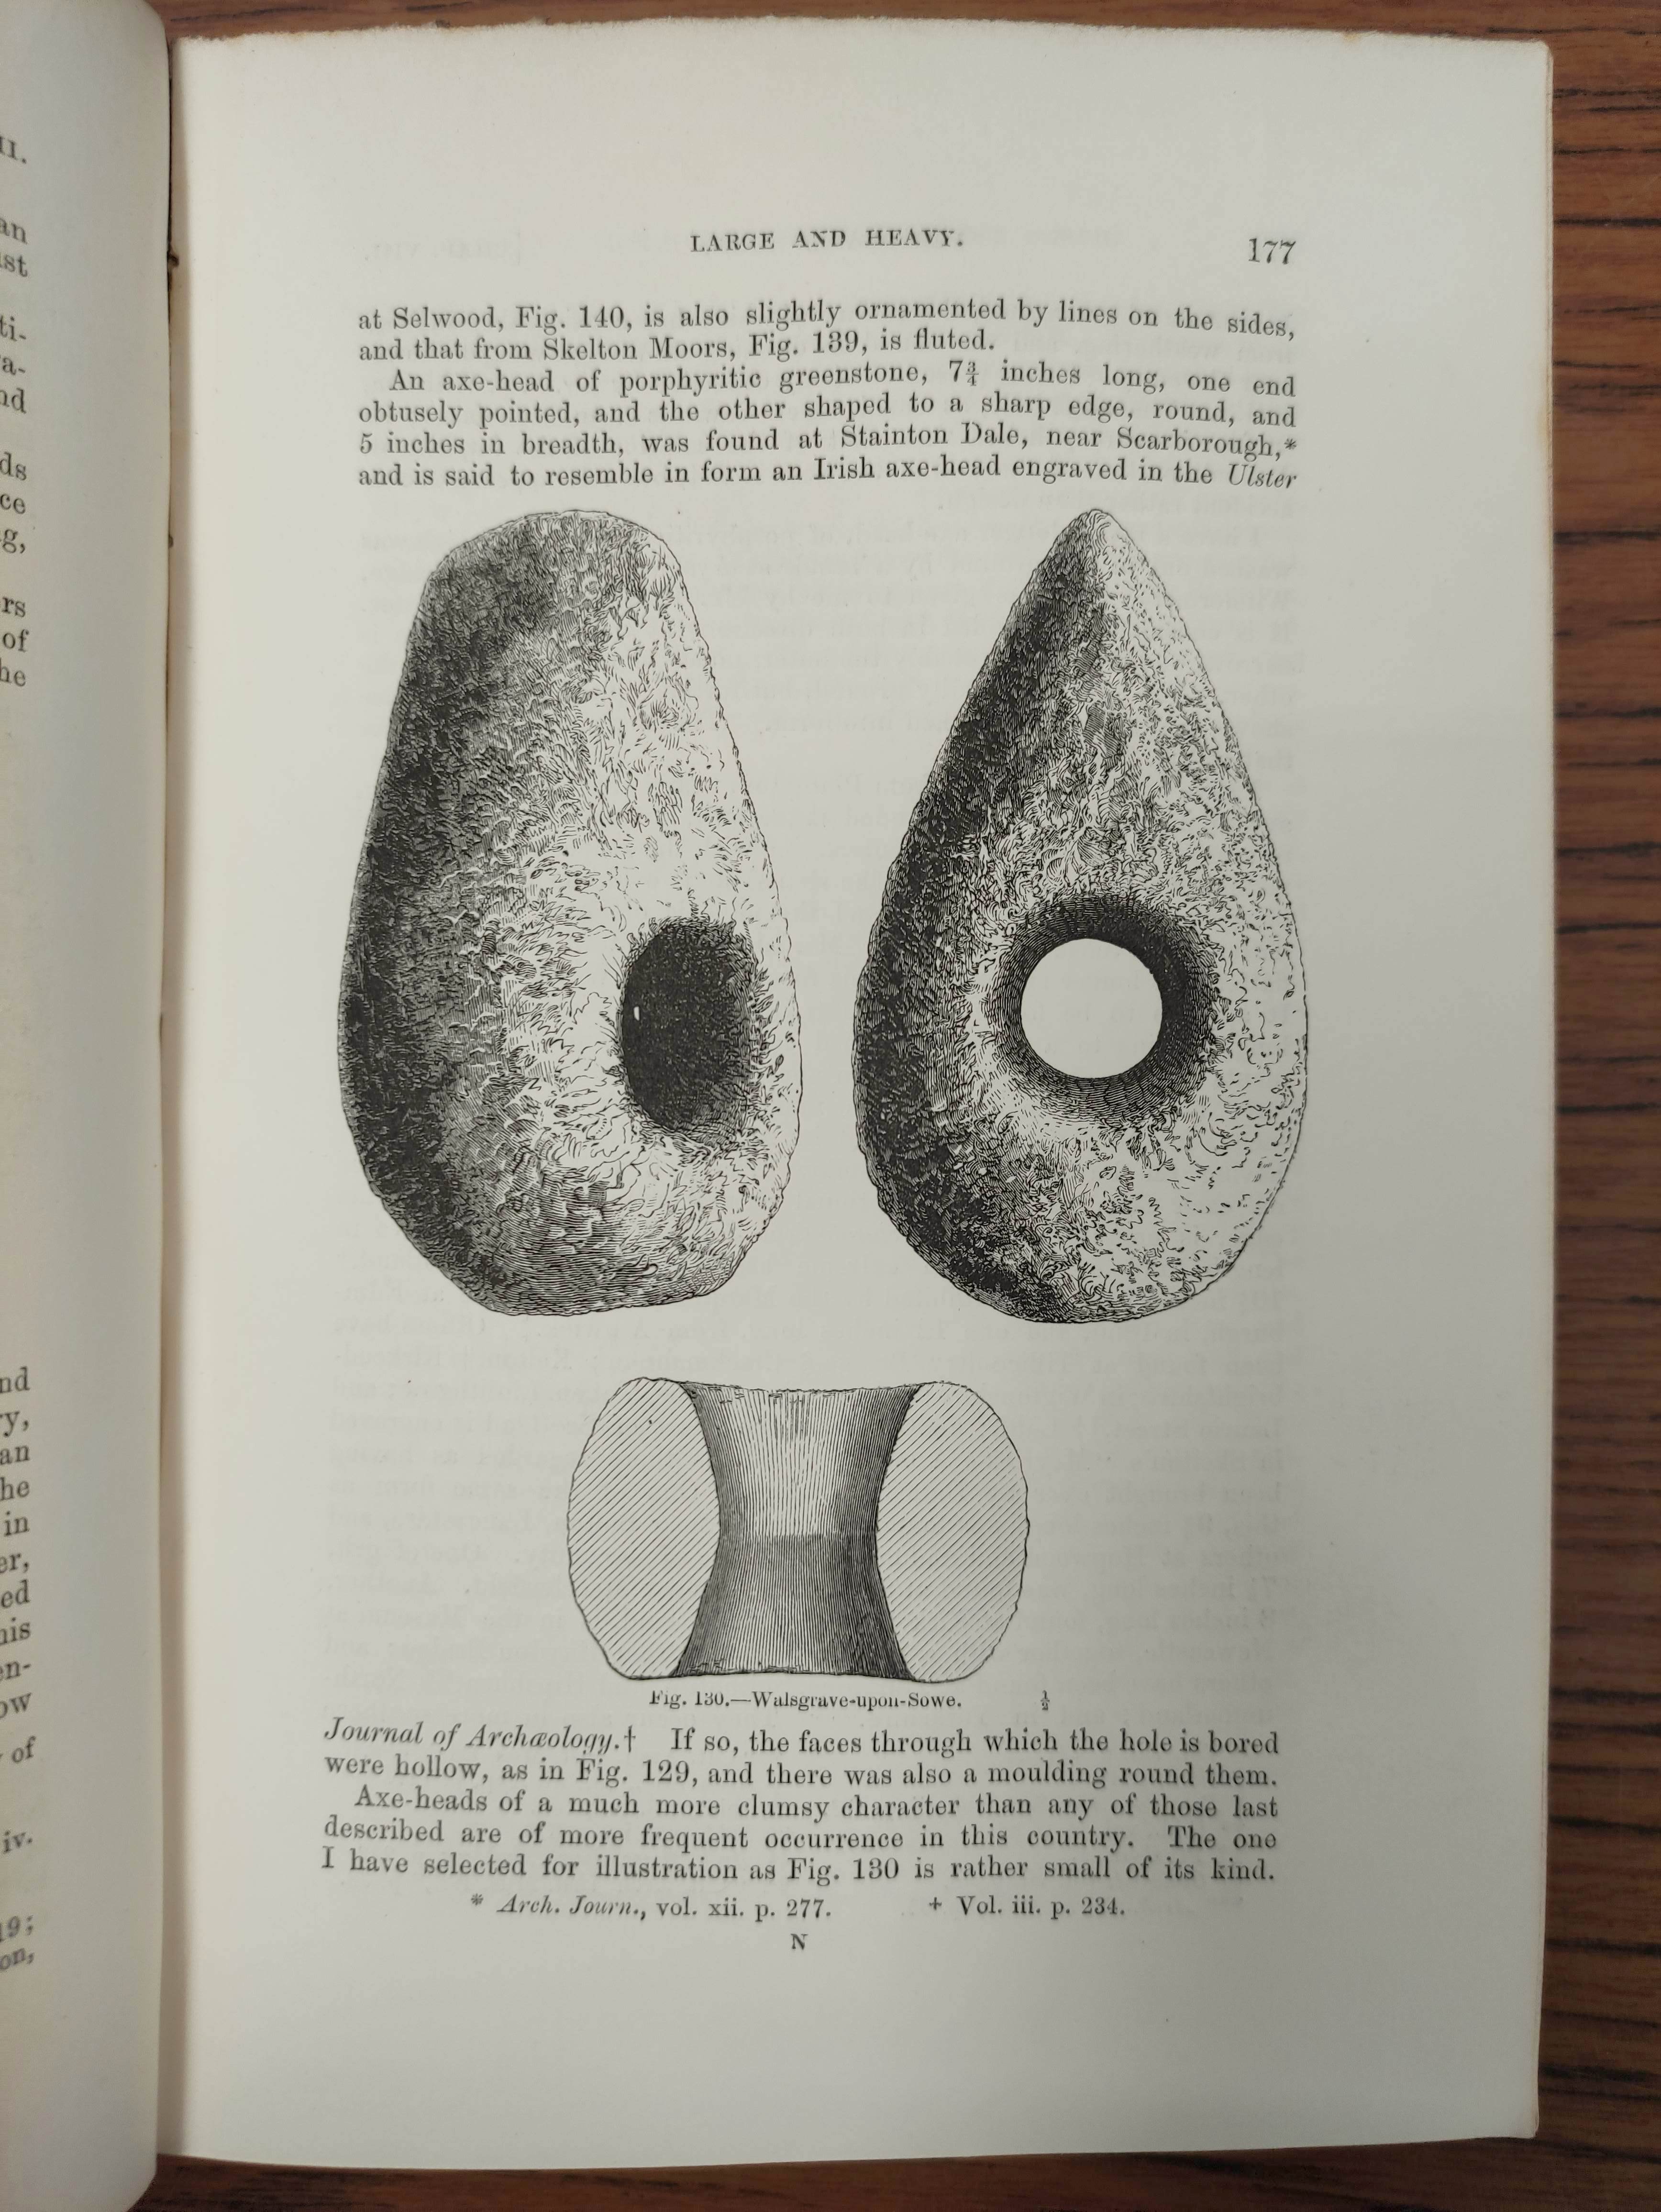 EVANS JOHN.  The Ancient Stone Implements, Weapons & Ornaments of Great Britain. Many text illus. - Image 7 of 10